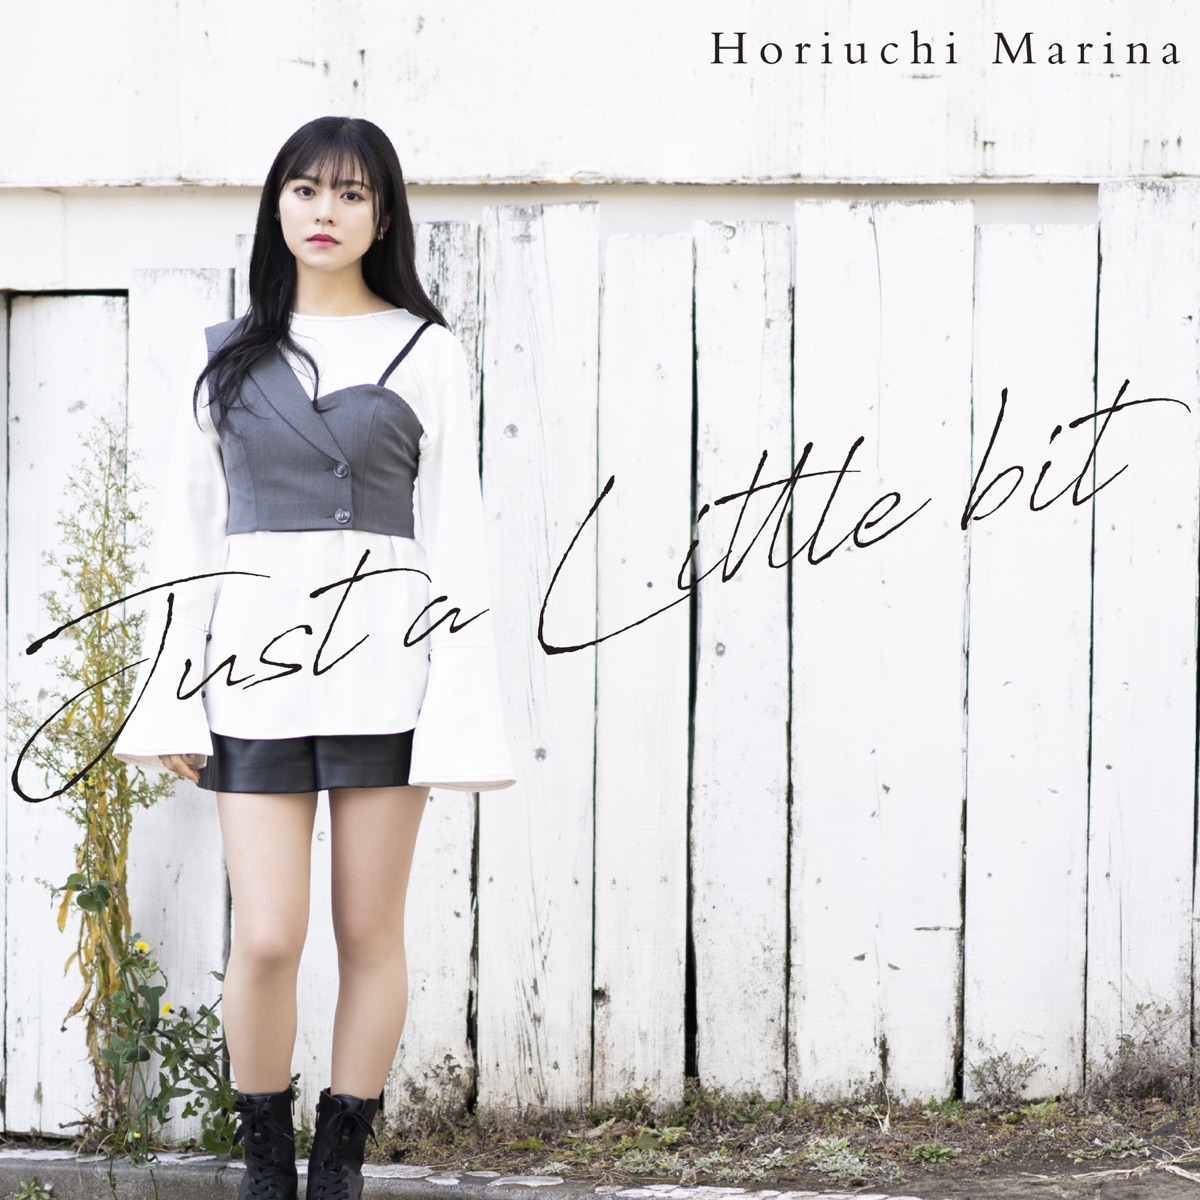 Cover art for『Marina Horiuchi - Just a little bit』from the release『Just a little bit』